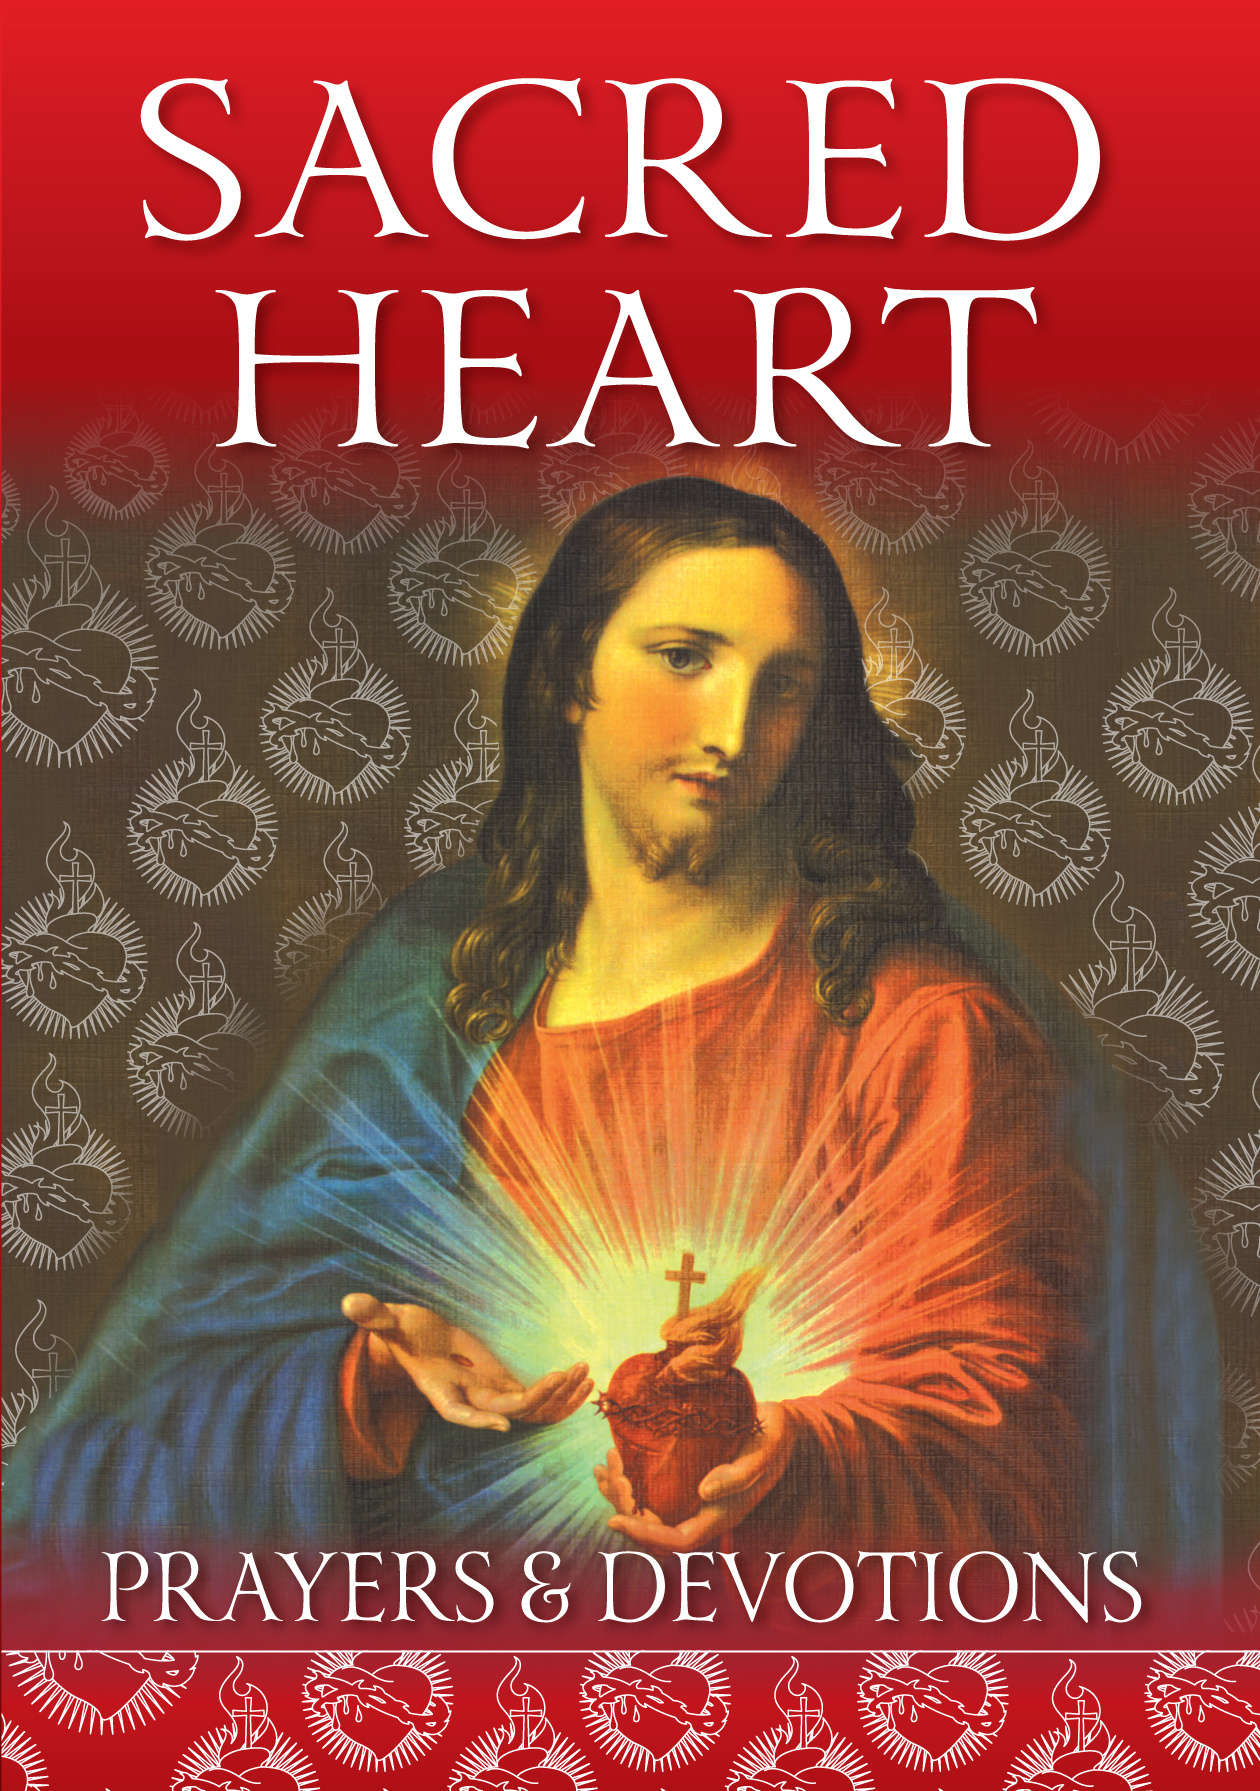 Sacred Heart Devotions by Donaly Foley Fast Delivery at Eden